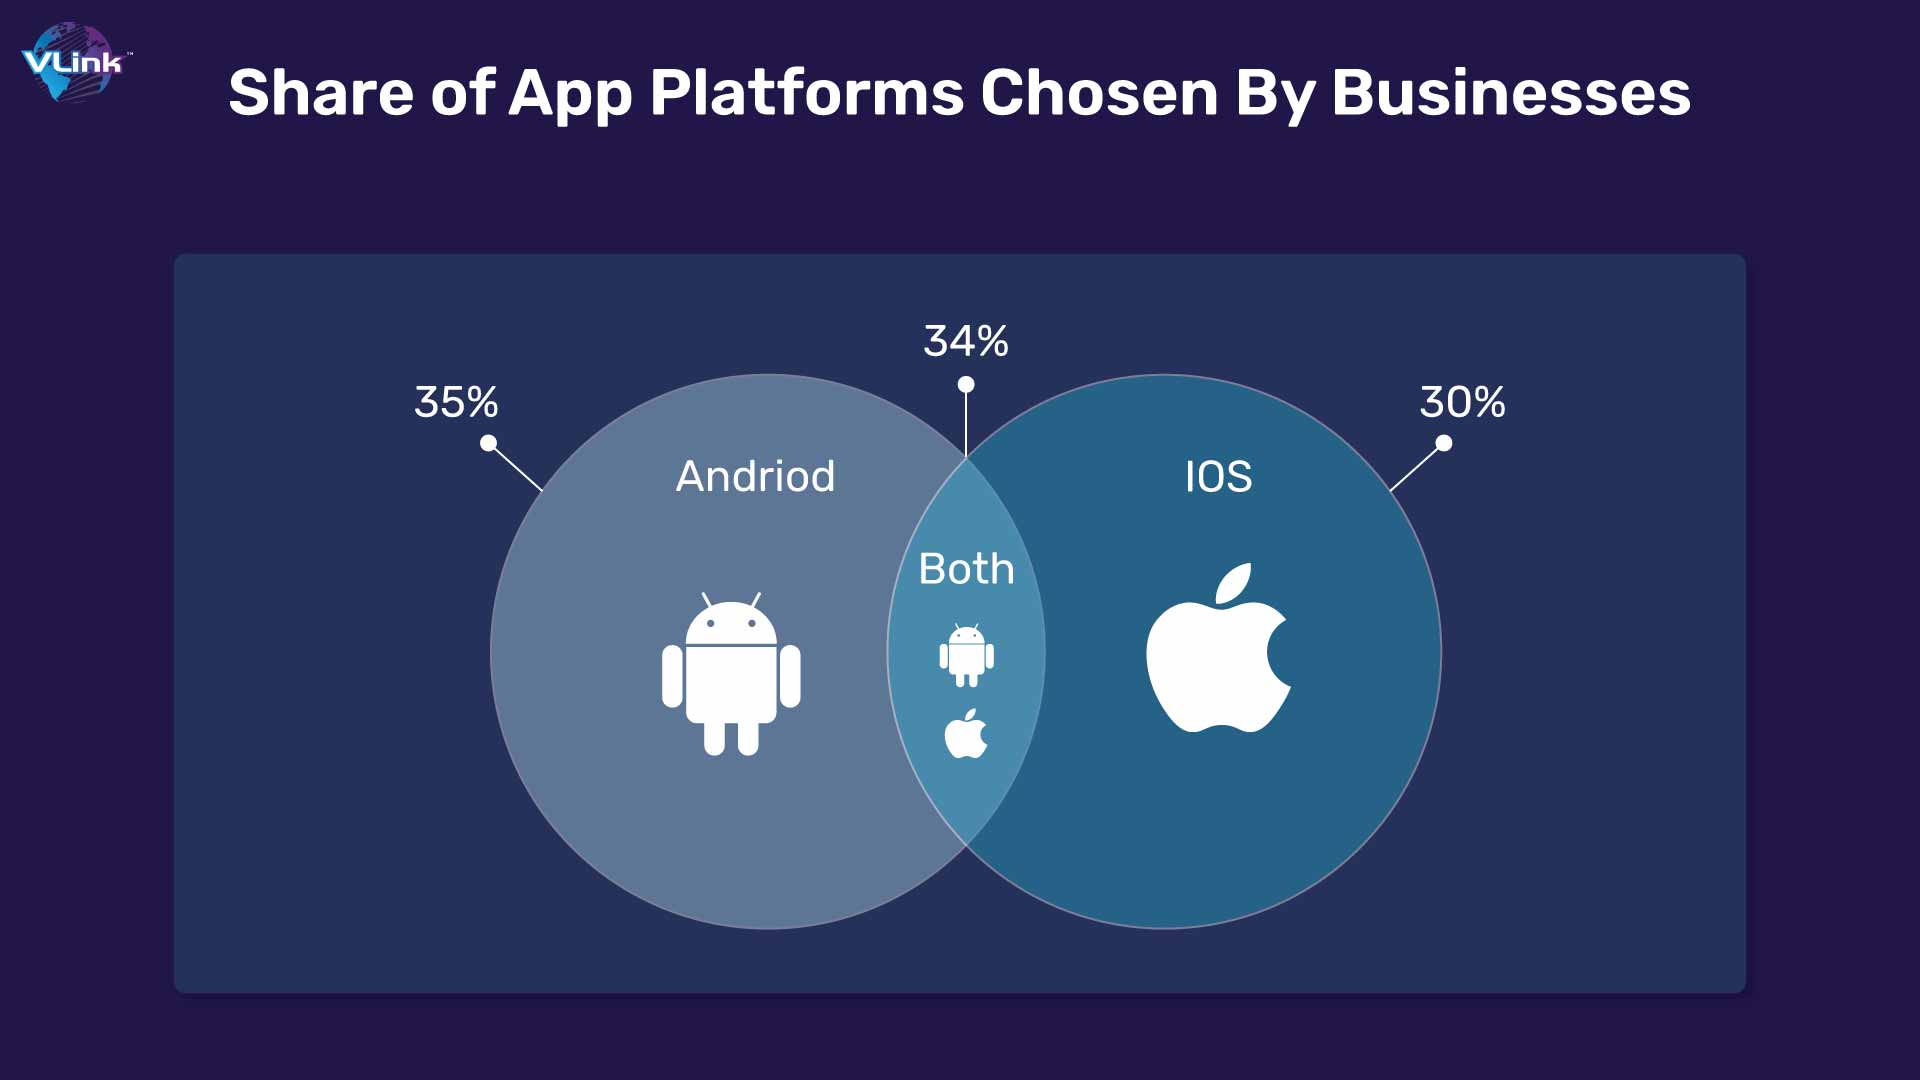 Share of App Platforms Chosen By Businesses